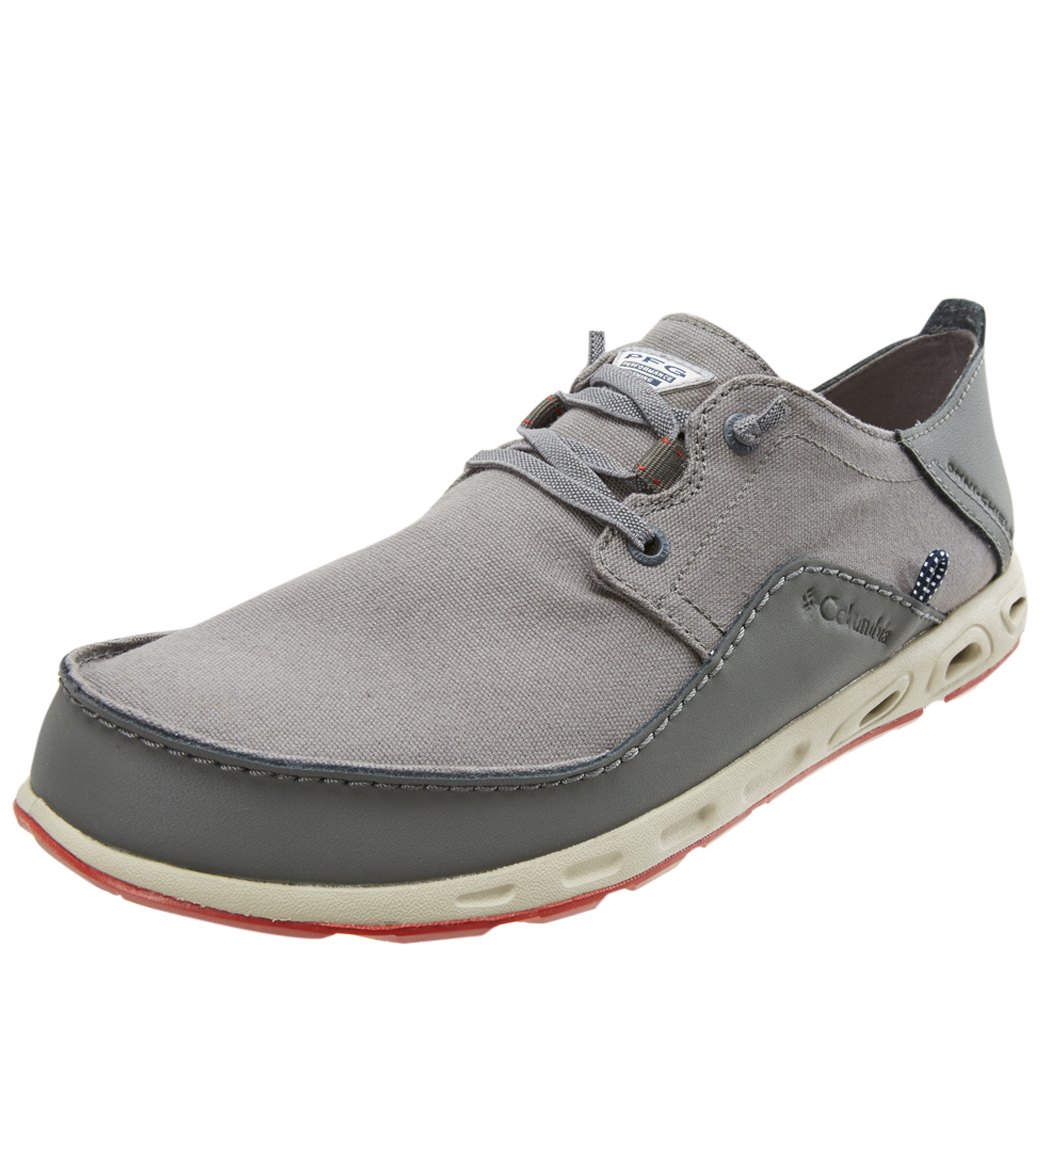 Columbia Men's Bahamatm Vented Relaxed Deck Shoe - City Grey Gypsy 8.5 Grey - Swimoutlet.com